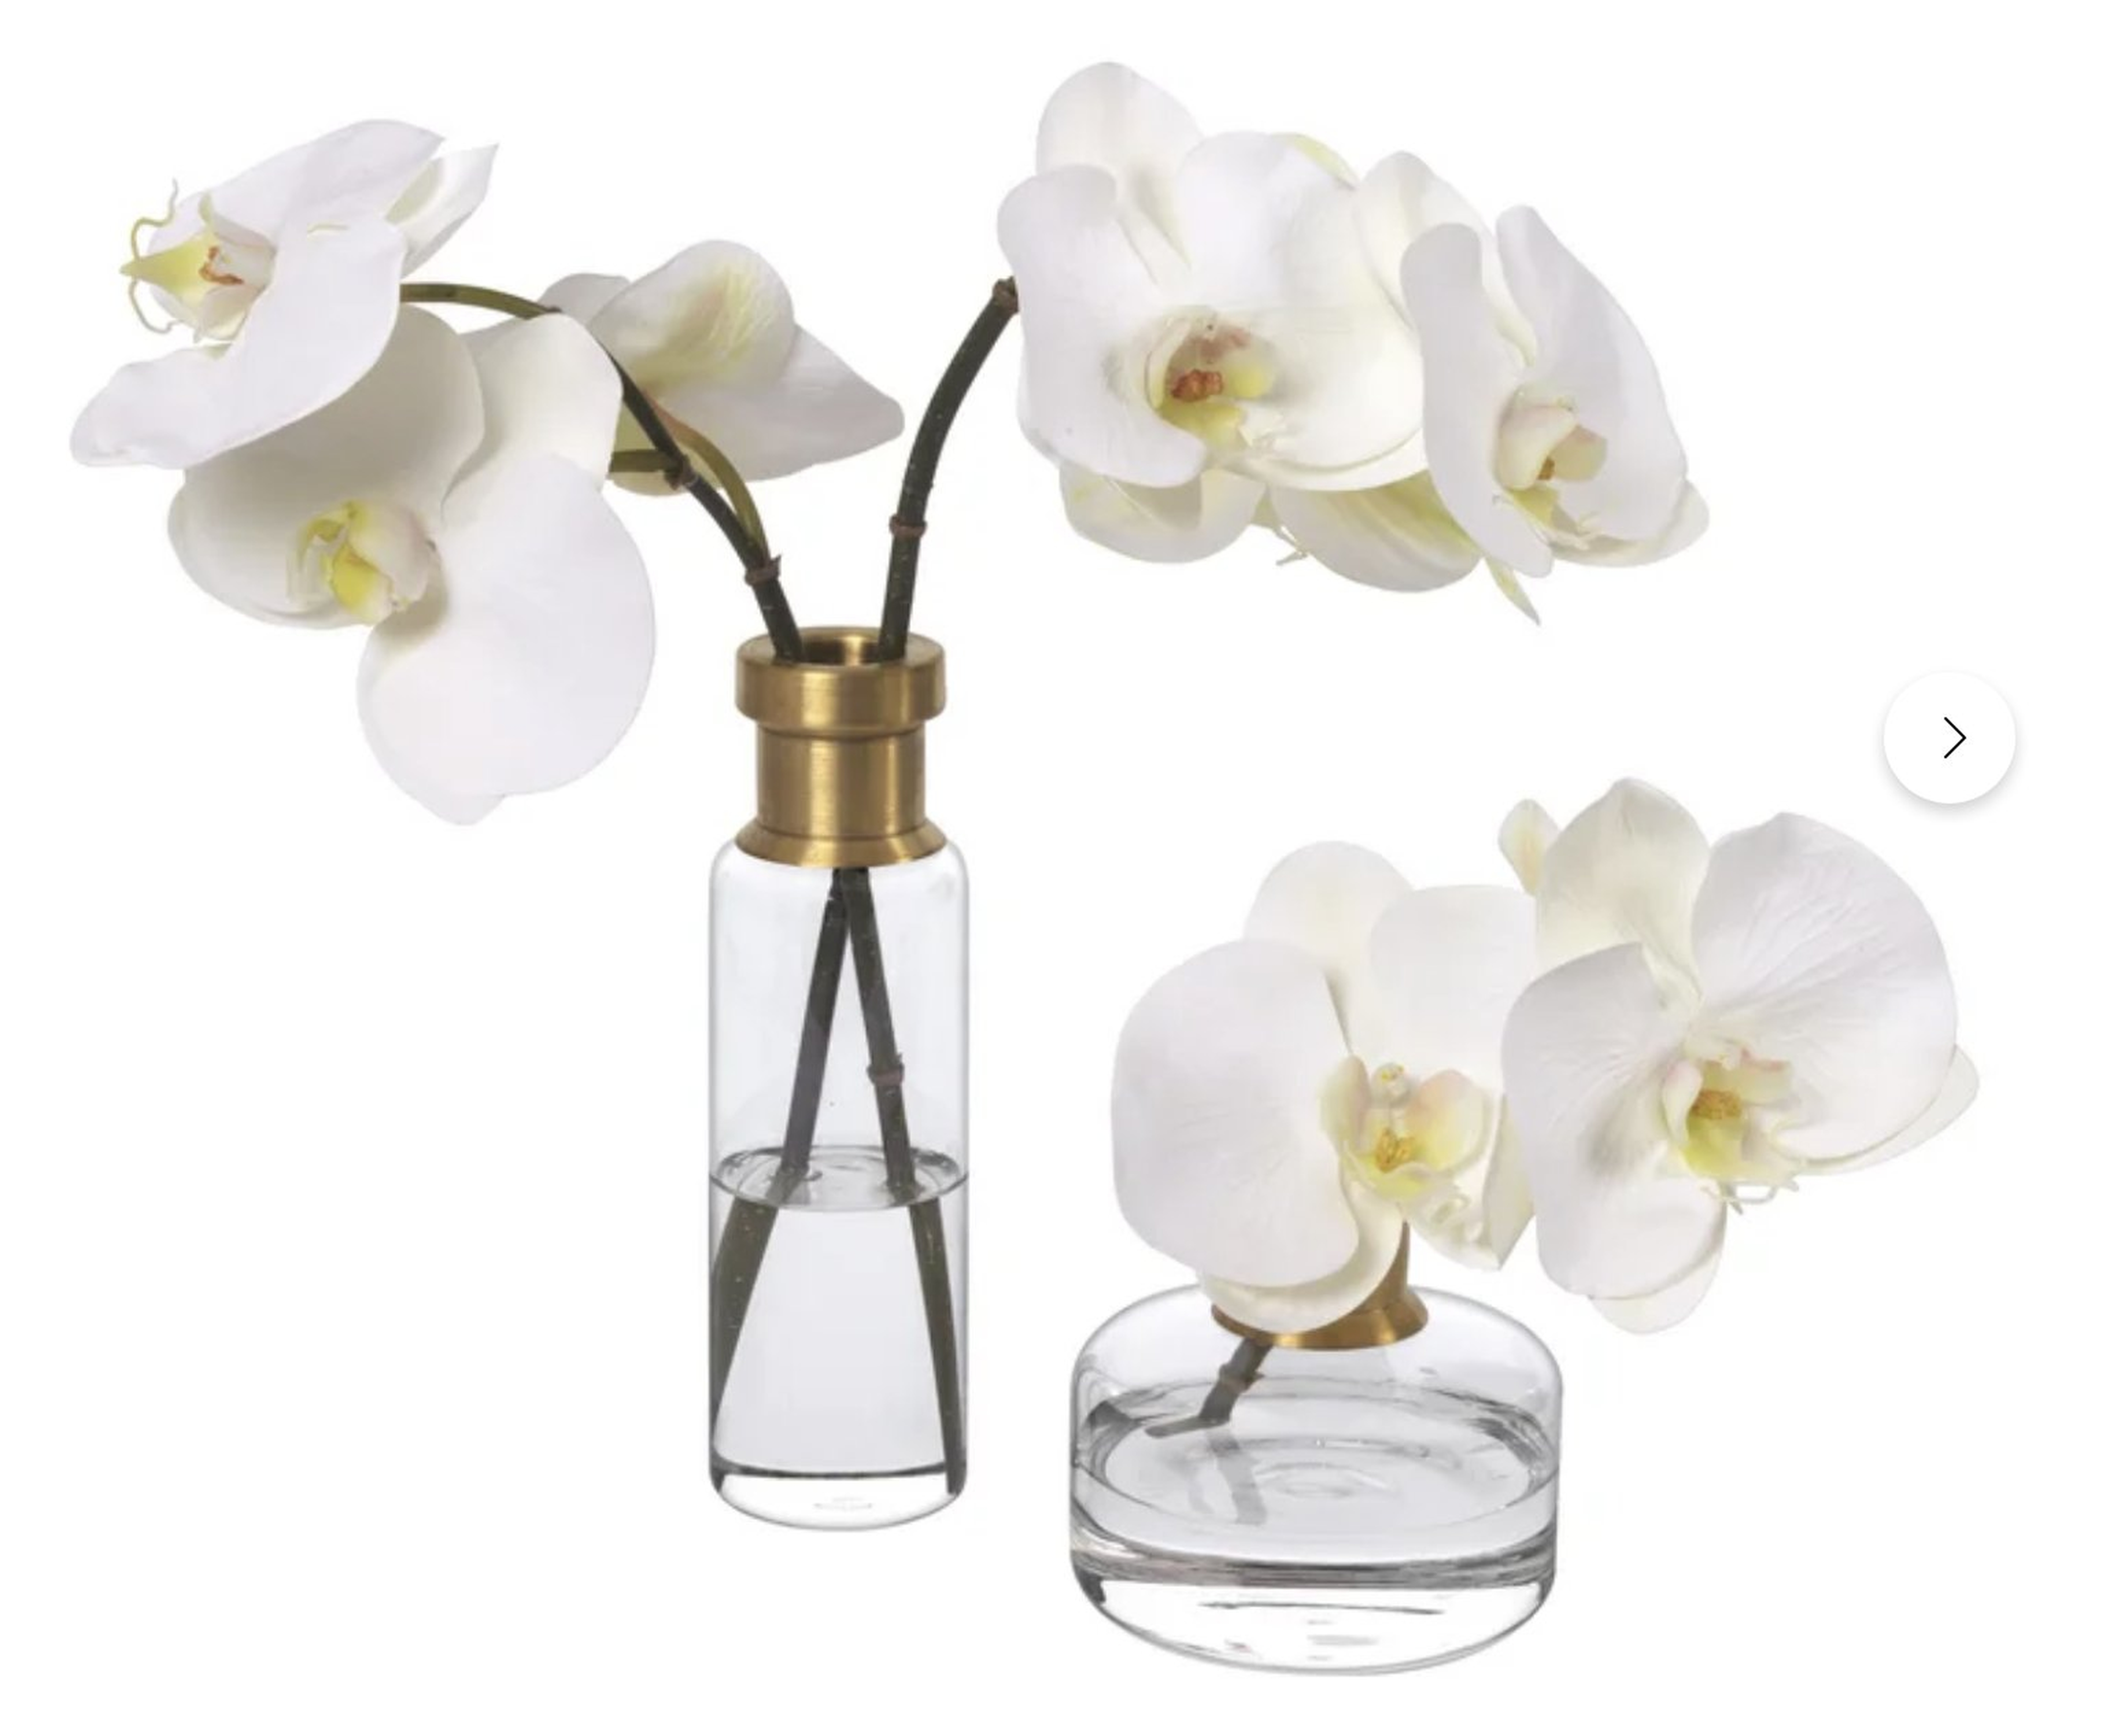 Diane James Home Phalaenopsis Orchids In Glass Bud Vases / Set Of 2 - Perigold